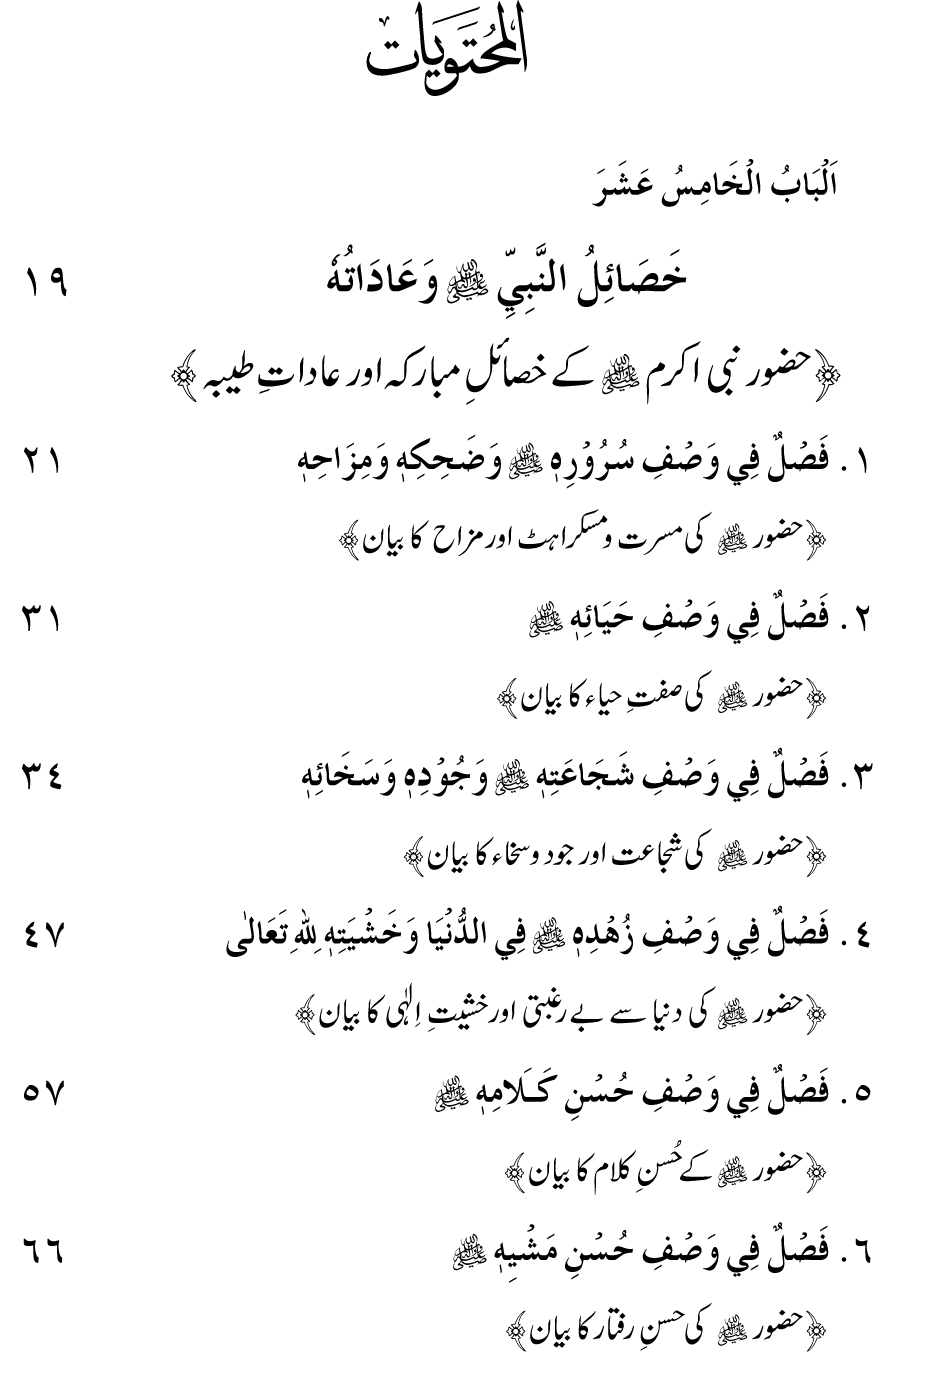 Ladders of Sunna for Deliverance from Deviation and Tribulations (Vol. 5)